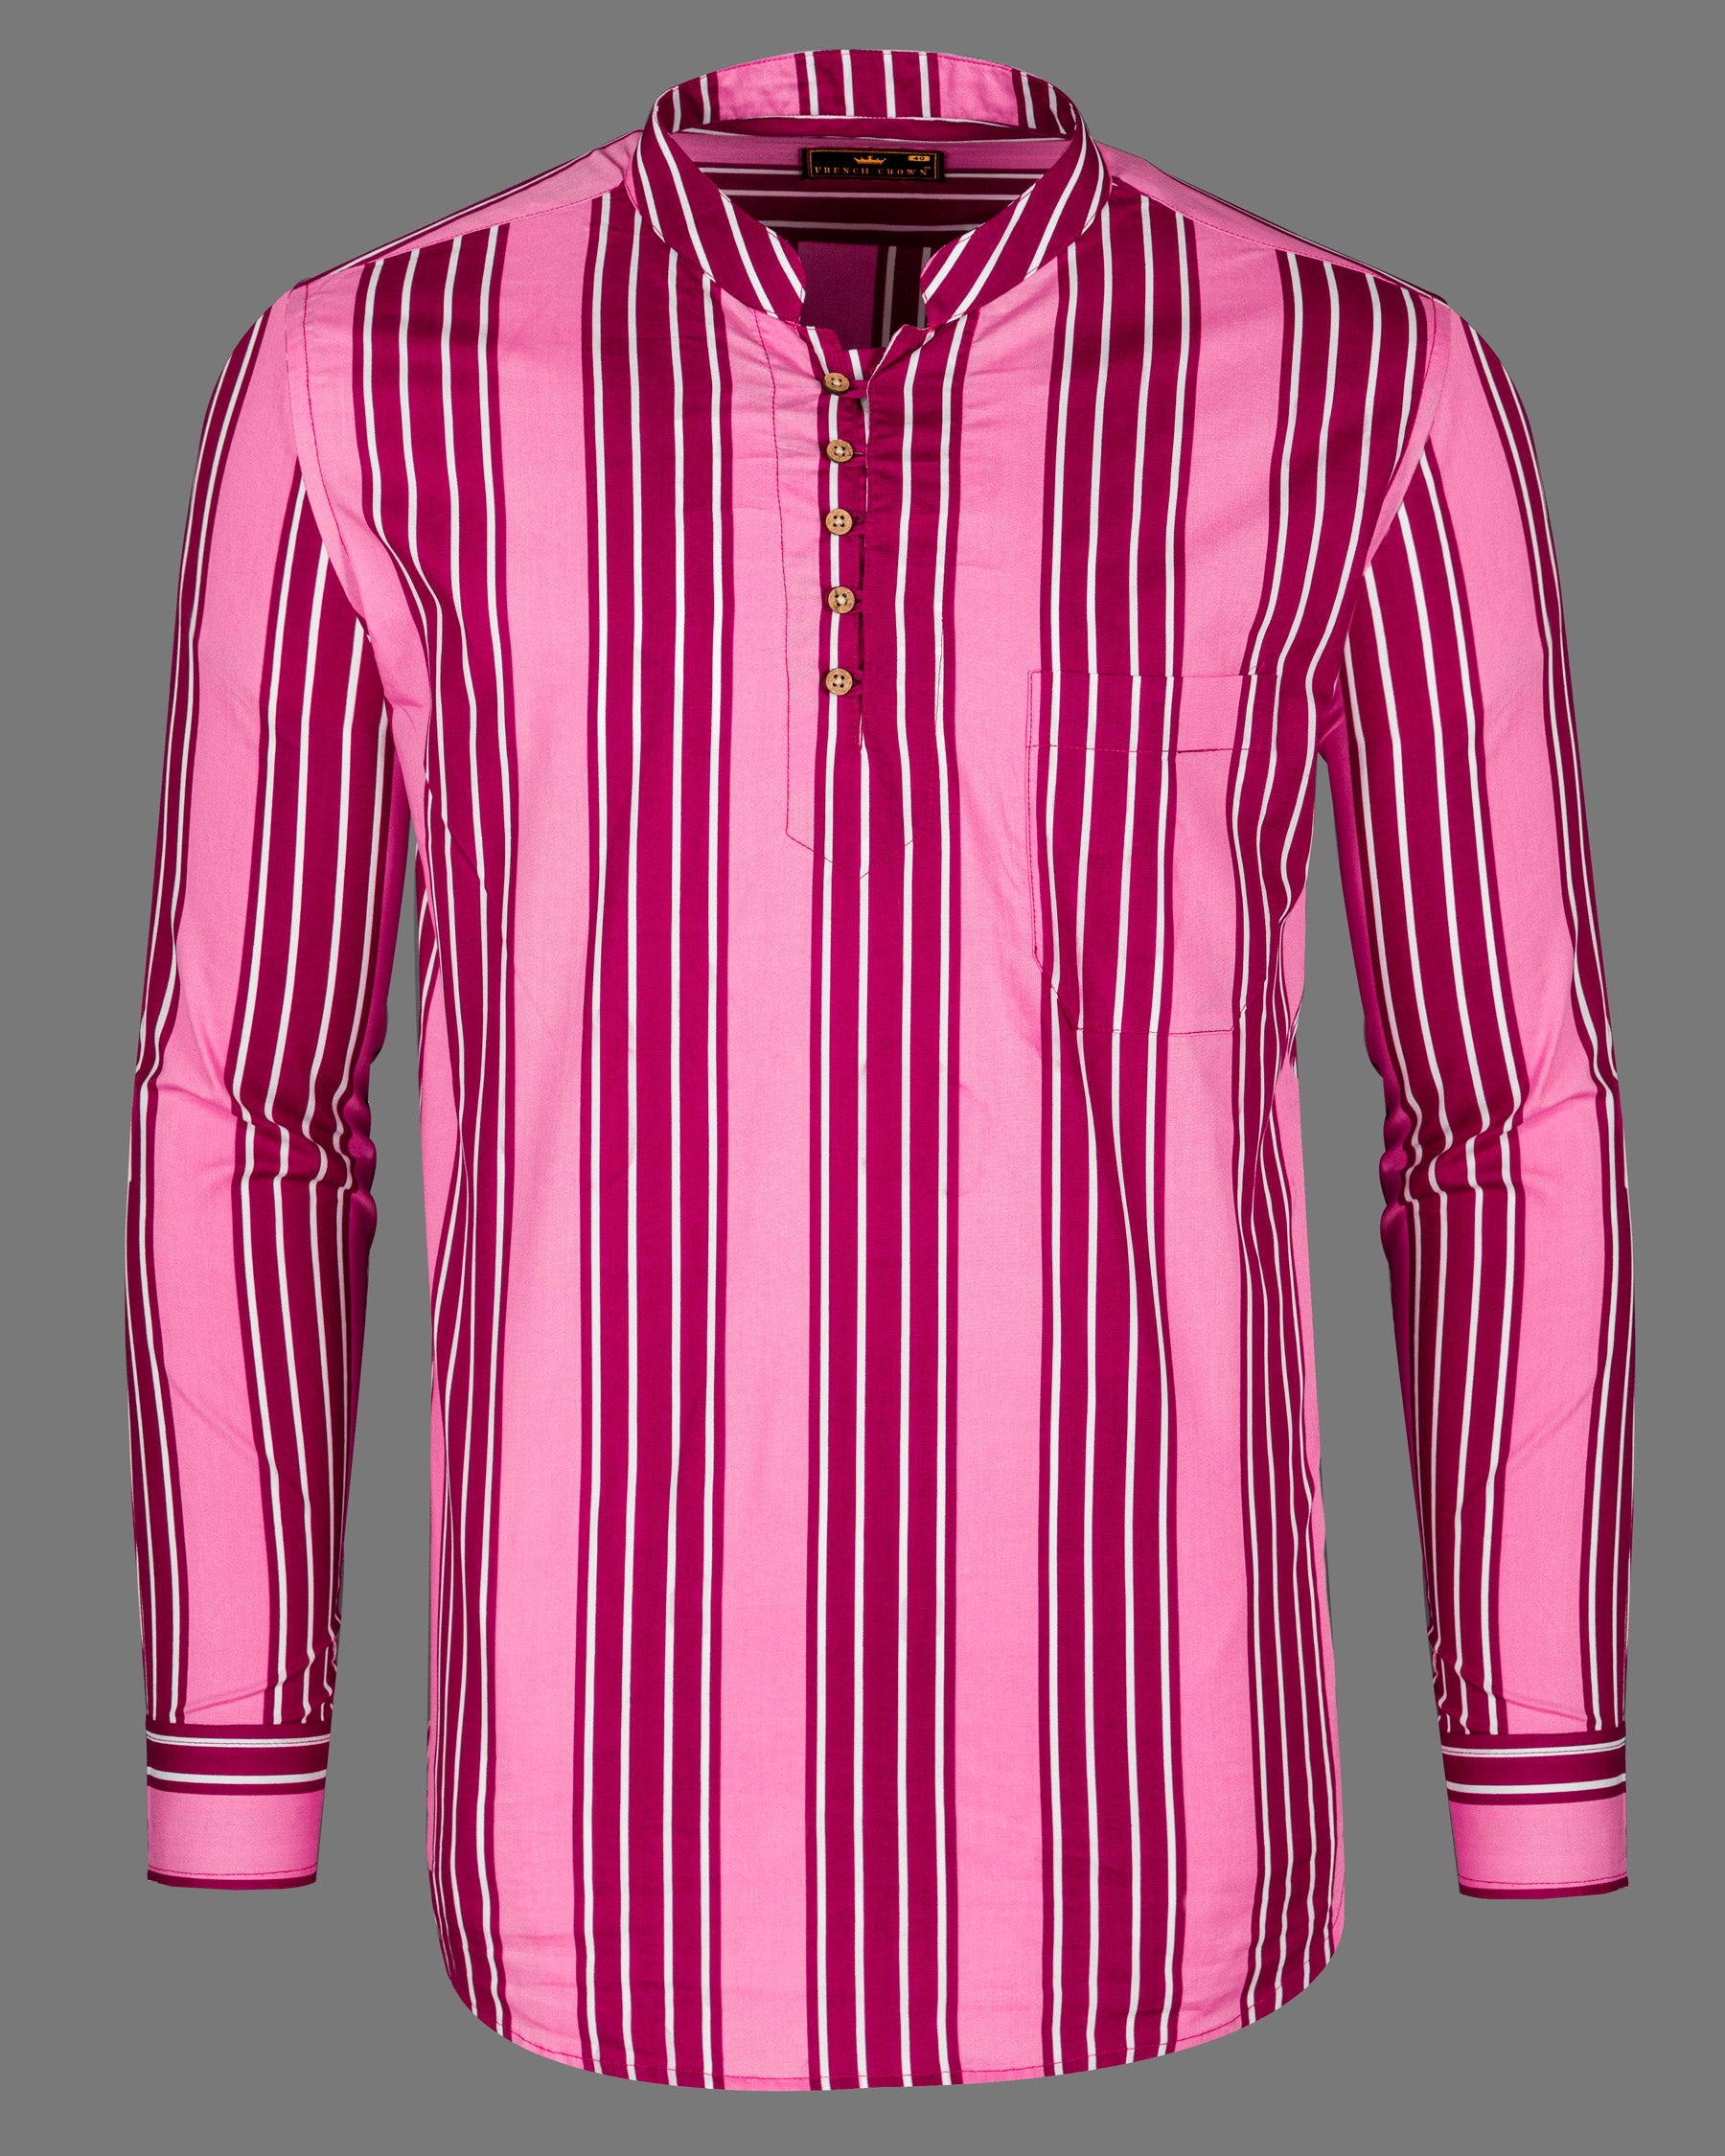 Tickle Me Pink and Razzberry Jam Striped Premium Cotton Kurta Shirt 5804-KS-38, 5804-KS-H-38, 5804-KS-39, 5804-KS-H-39, 5804-KS-40, 5804-KS-H-40, 5804-KS-42, 5804-KS-H-42, 5804-KS-44, 5804-KS-H-44, 5804-KS-46, 5804-KS-H-46, 5804-KS-48, 5804-KS-H-48, 5804-KS-50, 5804-KS-H-50, 5804-KS-52, 5804-KS-H-52